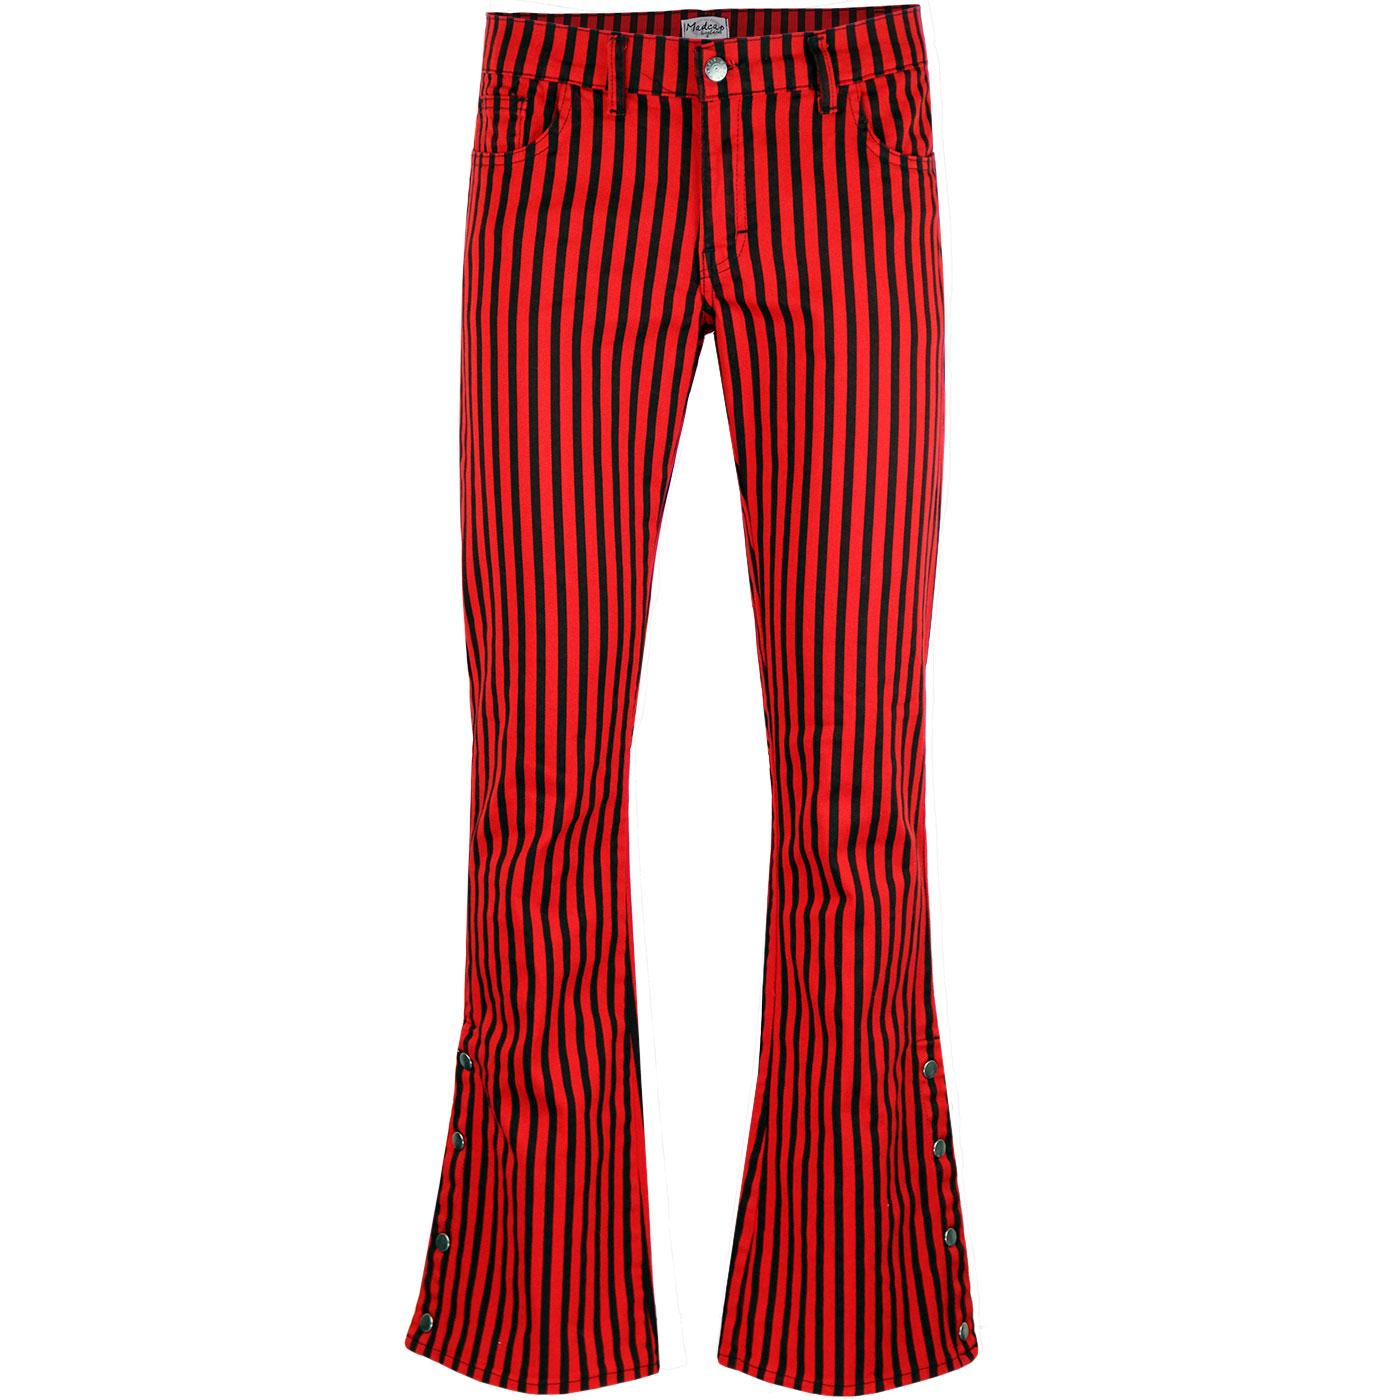 mens red and black striped trousers